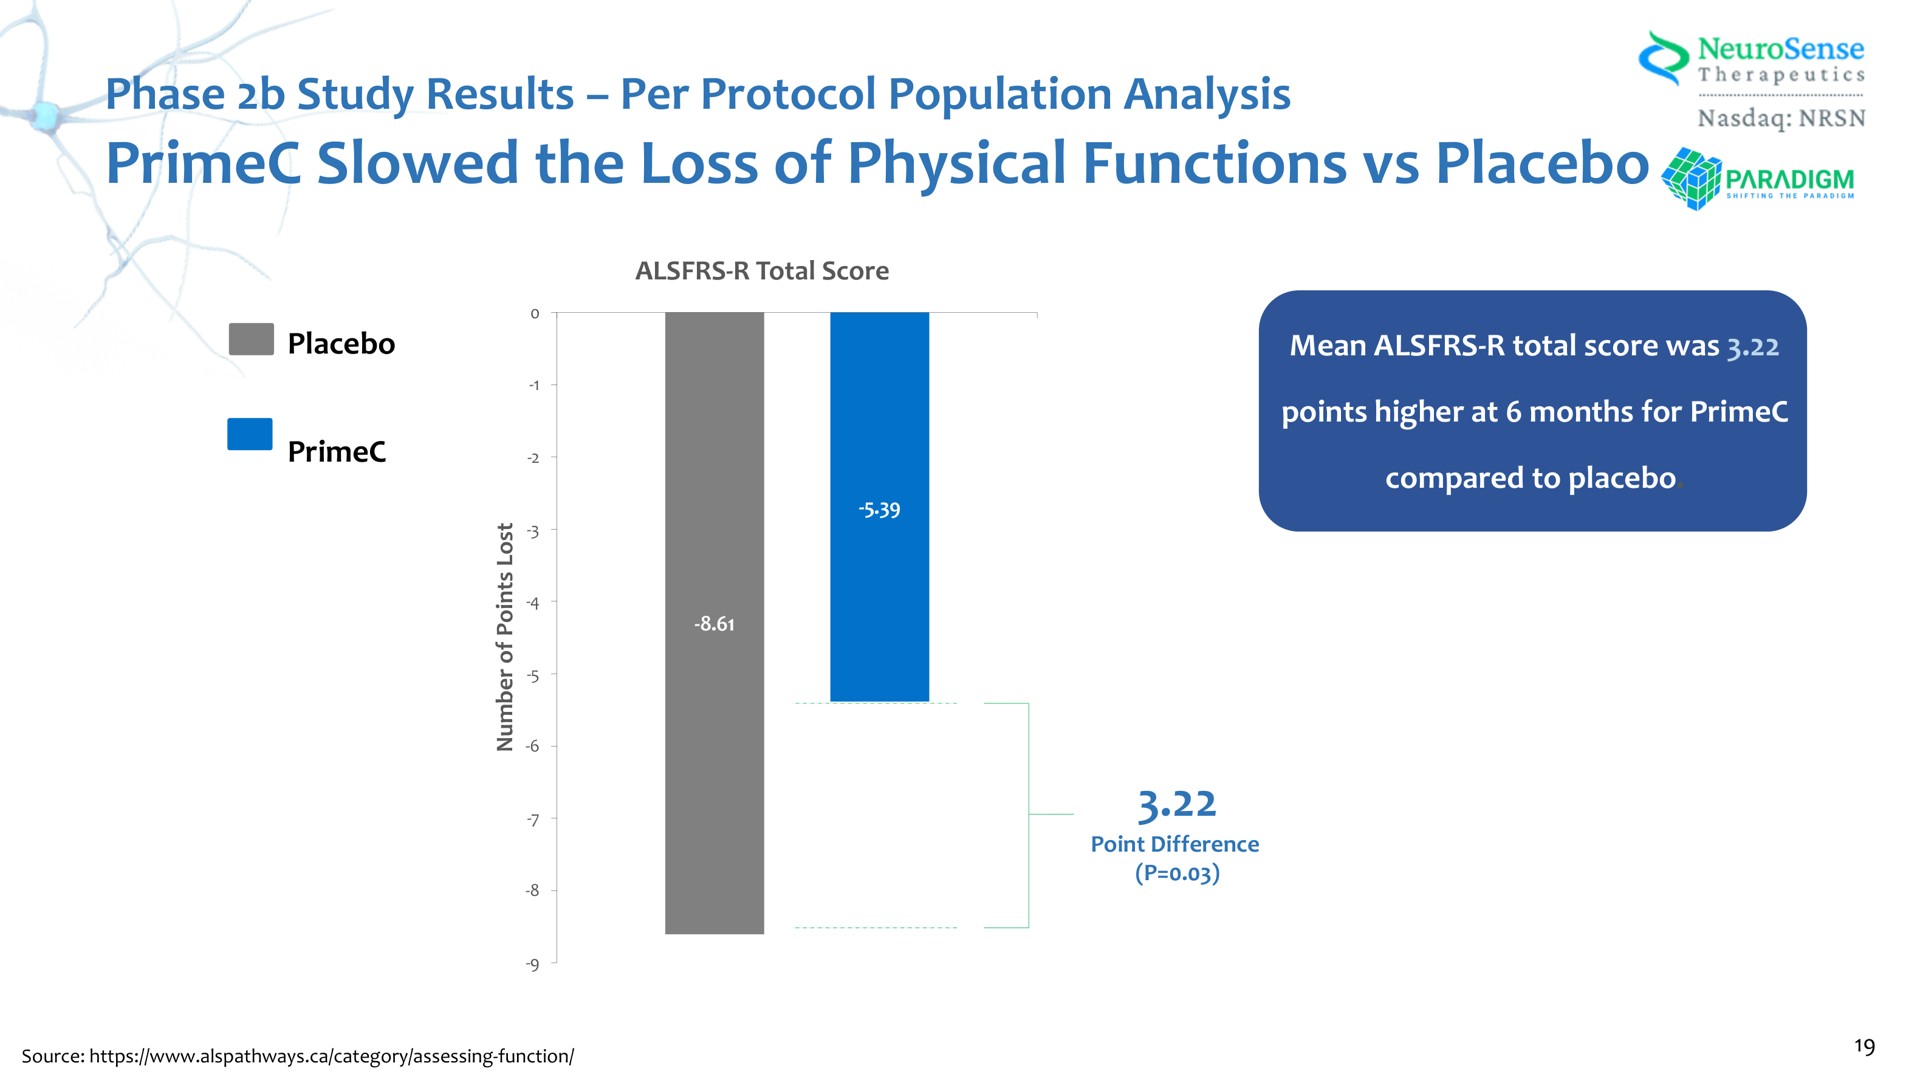 slowed the loss of physical functions placebo | NeuroSense Therapeutics